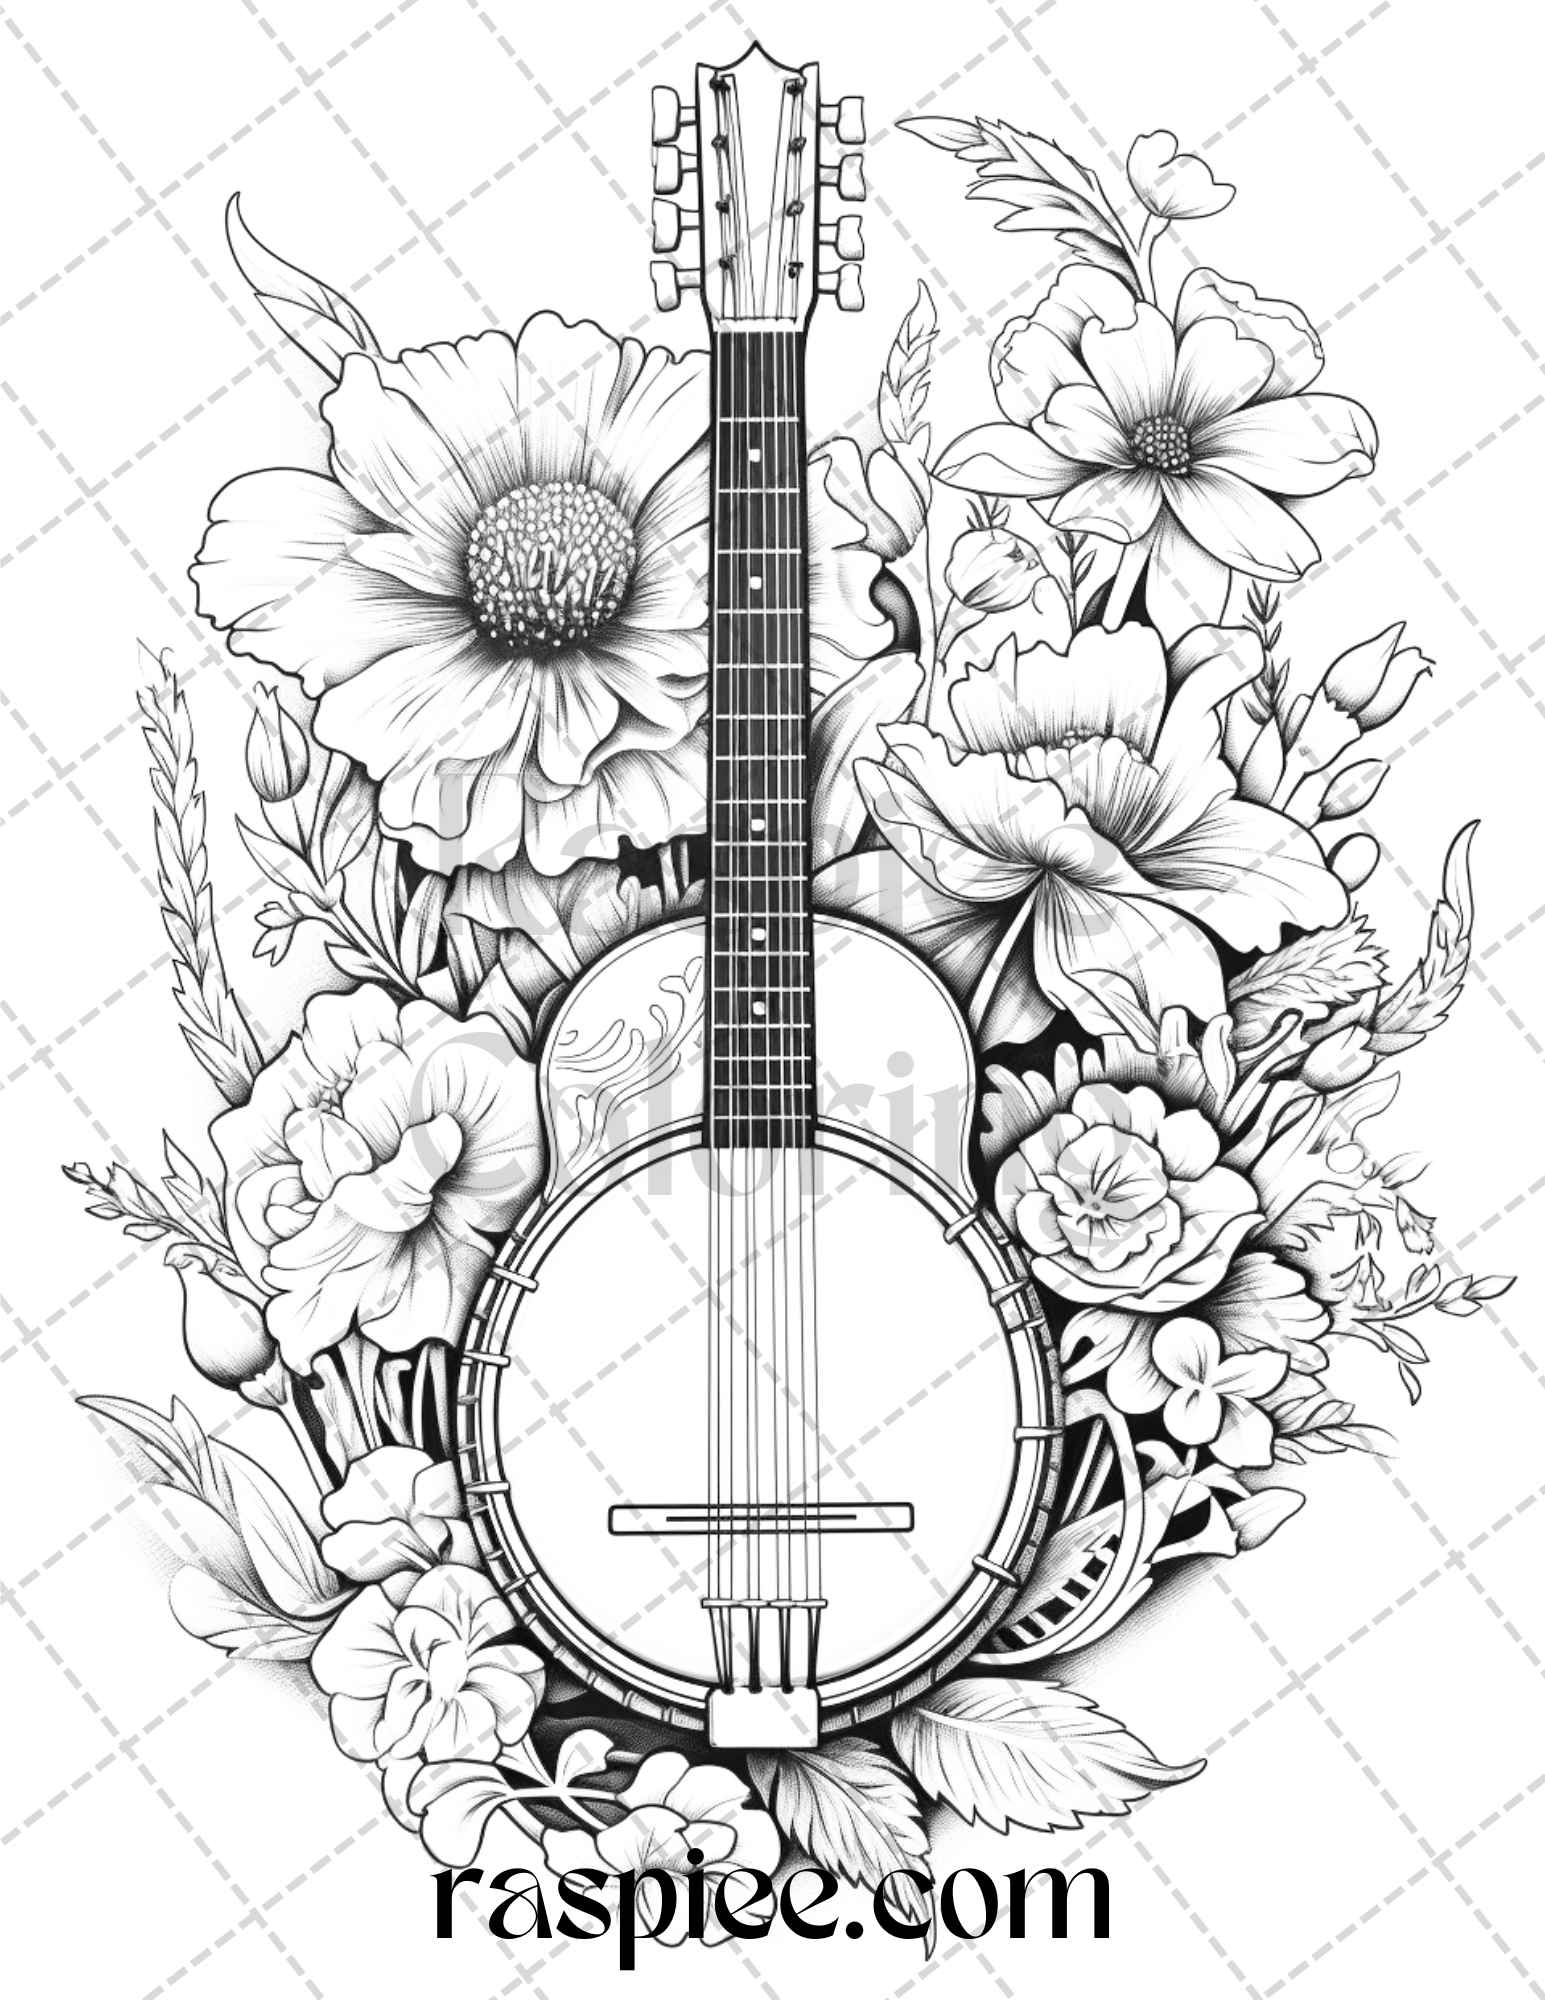 Musical Instruments Names: Over 592 Royalty-Free Licensable Stock  Illustrations & Drawings | Shutterstock